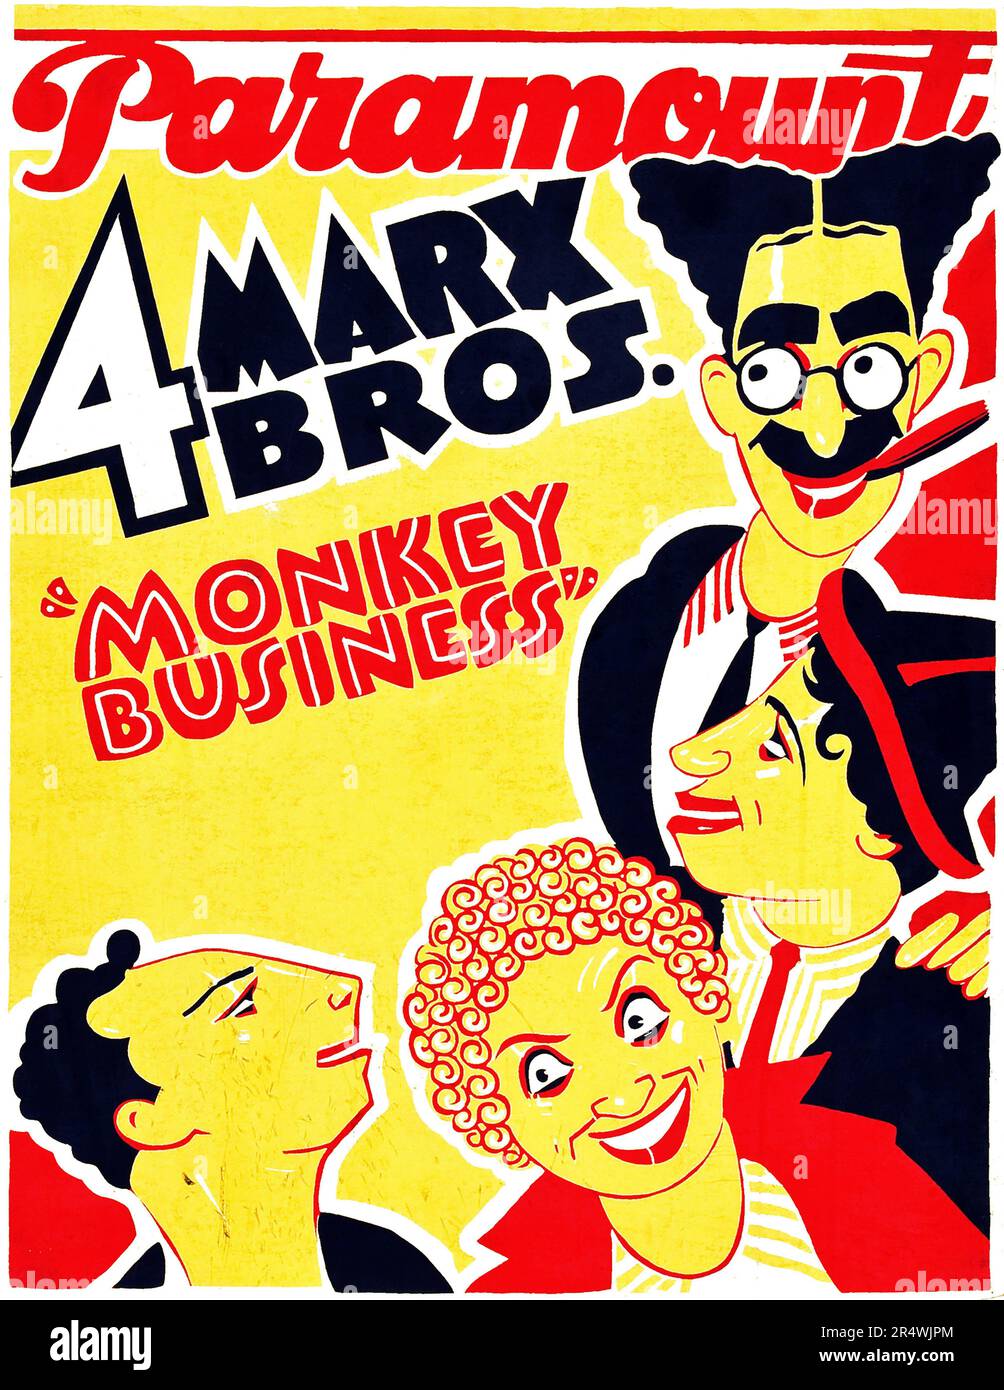 Monkey Business is a 1931 comedy film. It is the third of the Marx Brothers' released movies, and the first not to be an adaptation of one of their Broadway shows. The film stars the four brothers: Groucho Marx, Chico Marx, Harpo Marx, and Zeppo Marx, and screen comedienne Thelma Todd. It is directed by Norman Z. McLeod. The story takes place in large part on an ocean liner crossing the Atlantic Ocean. Stock Photo